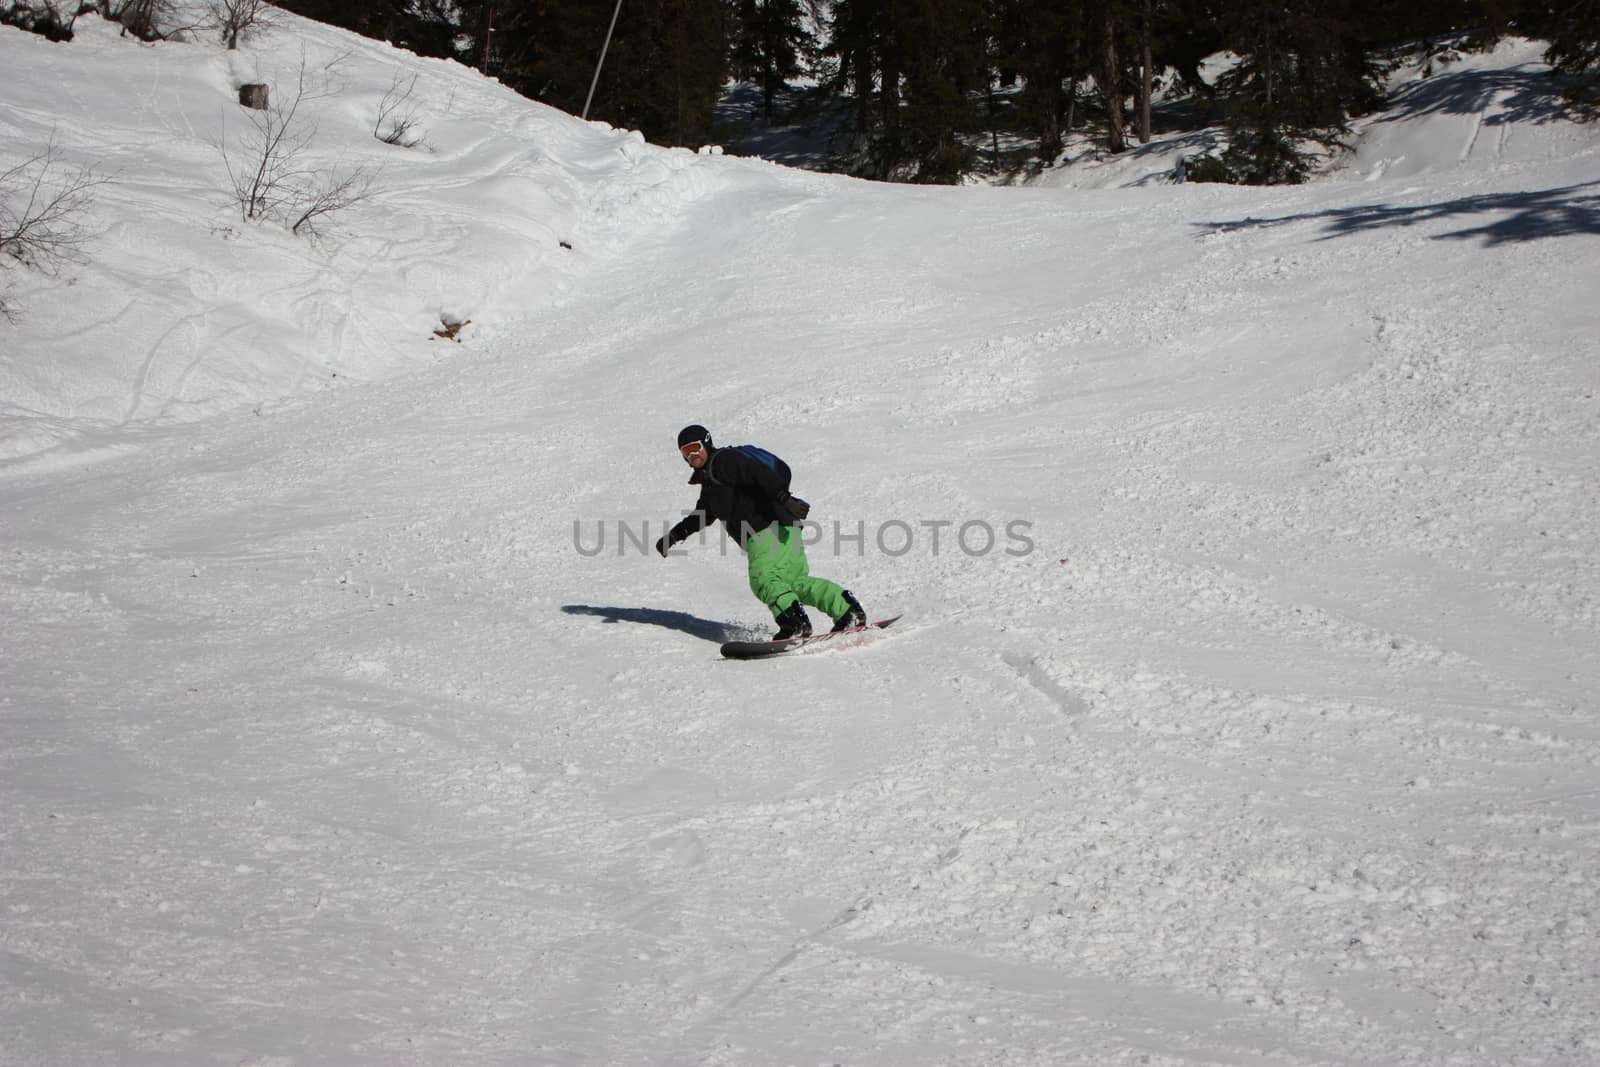 snowboarder carving a turn on an alpine piste by chrisga